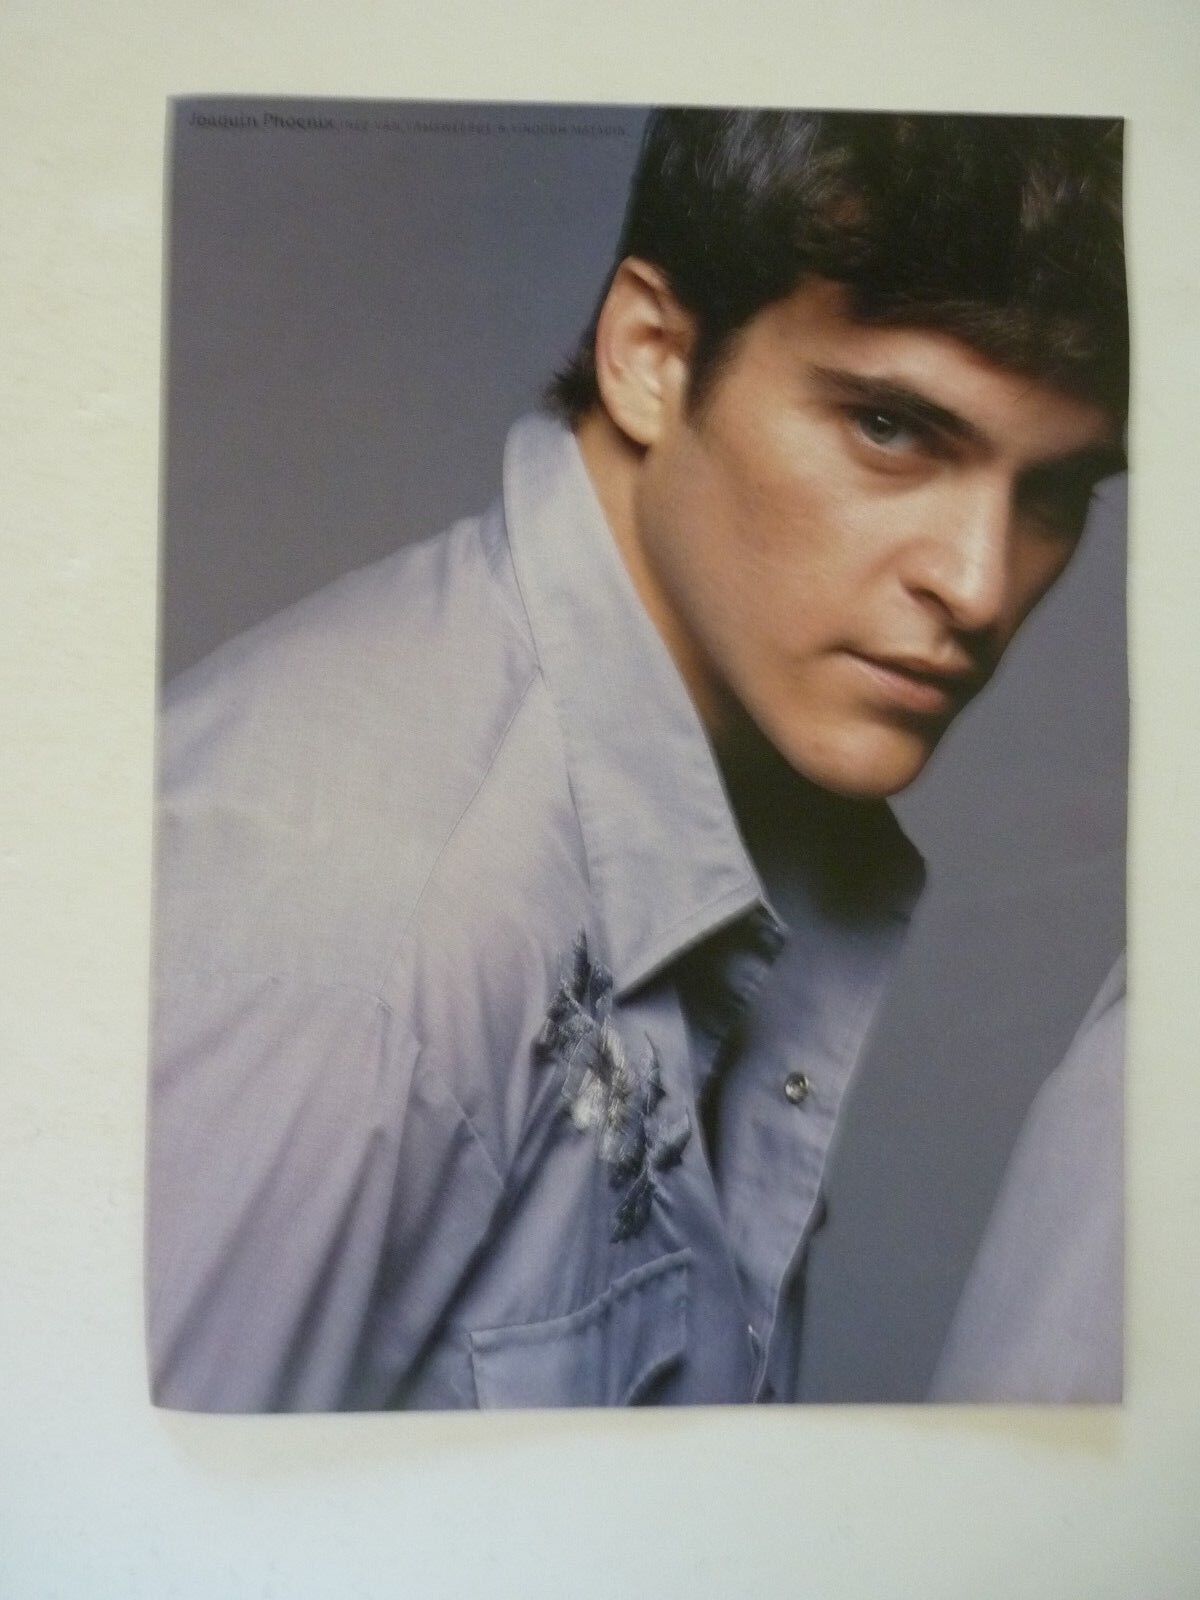 Joaquin Phoenix Single Side Coffee Table Book Photo Poster painting Page 9x12